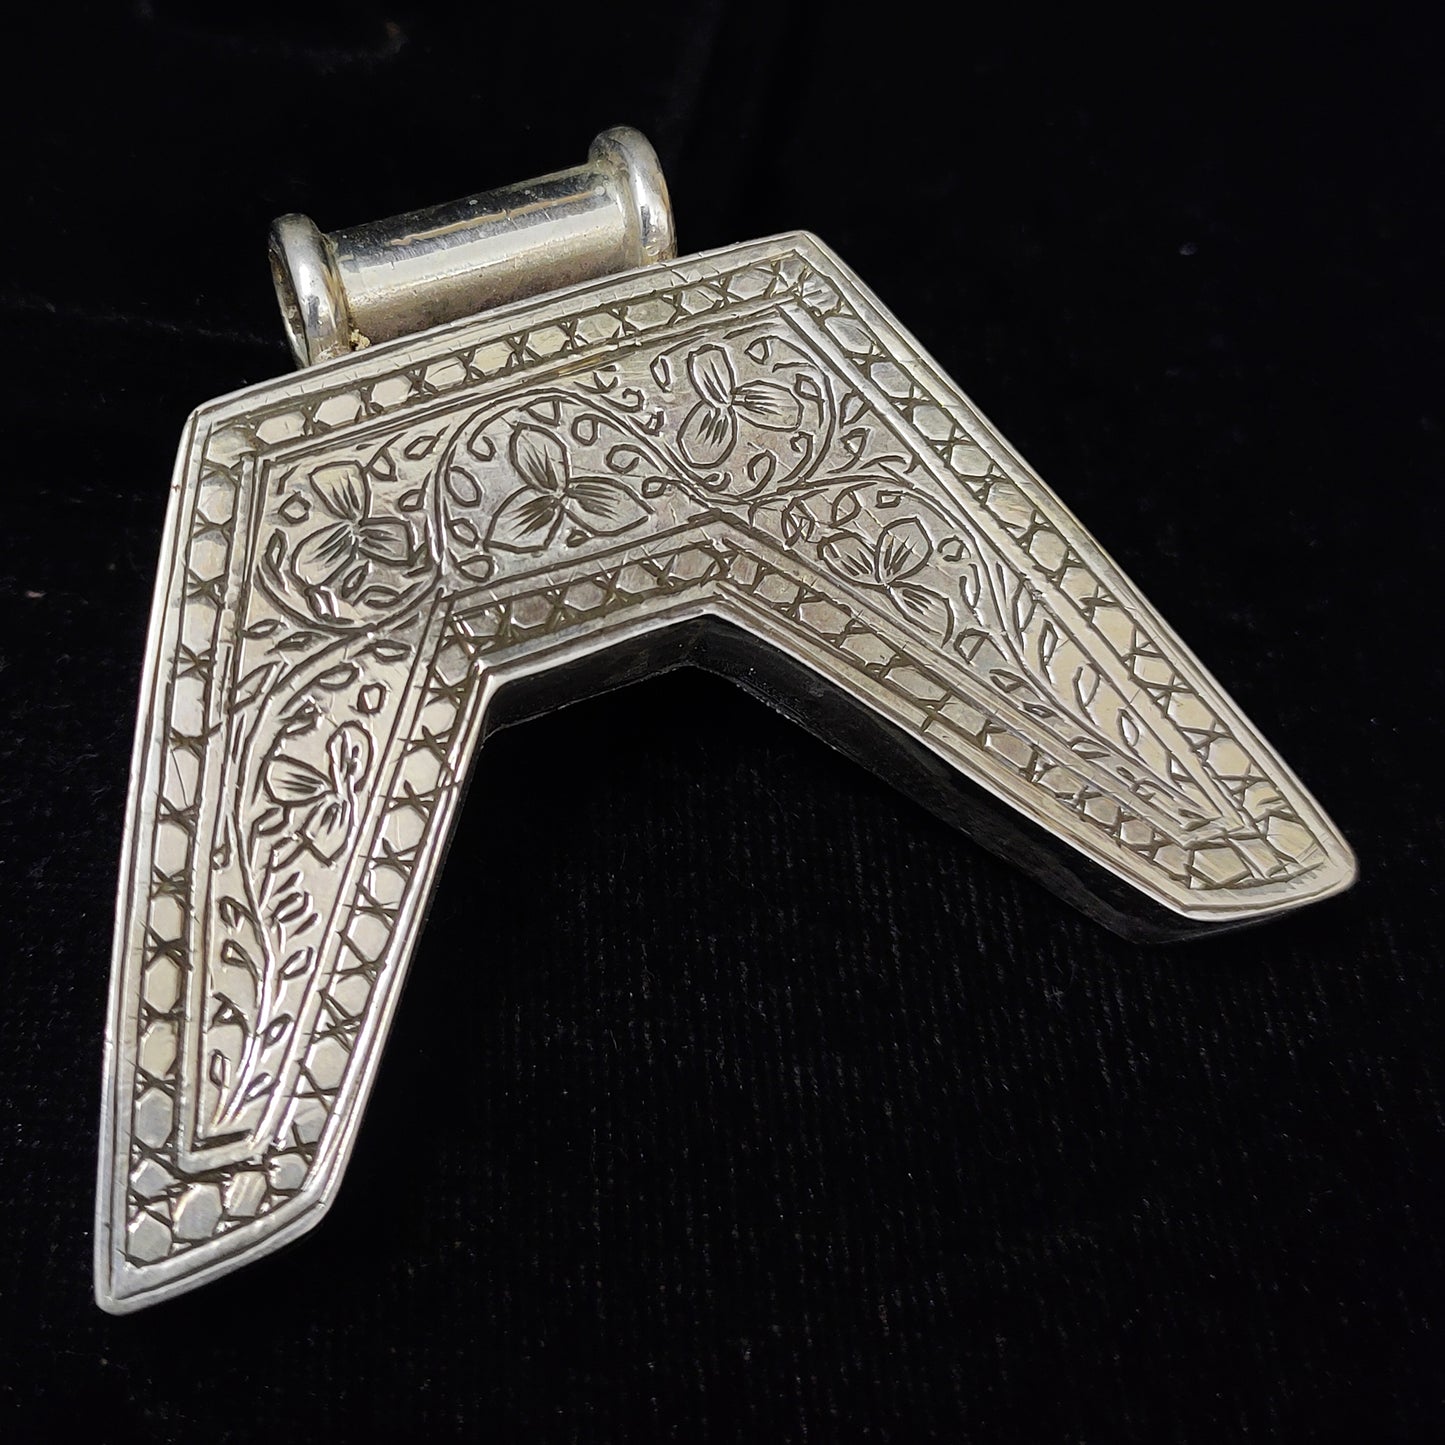 Rajasthan Tribal Silver Handcrafted Pendant